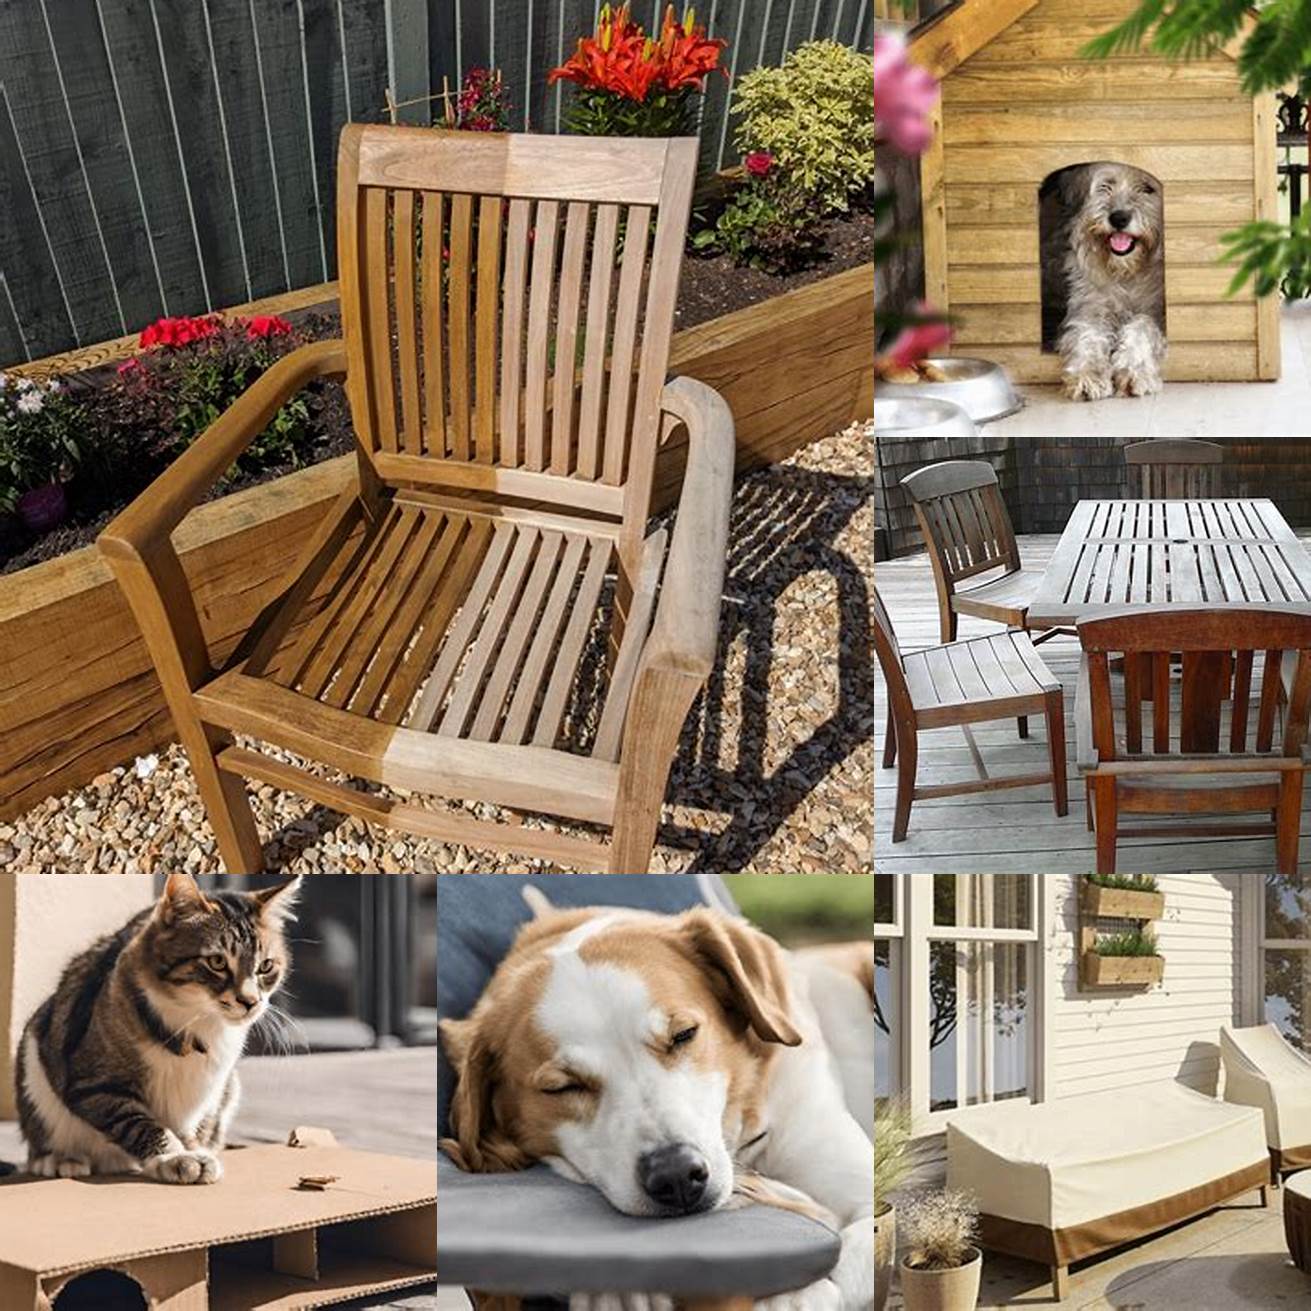 Protecting teak furniture from pets